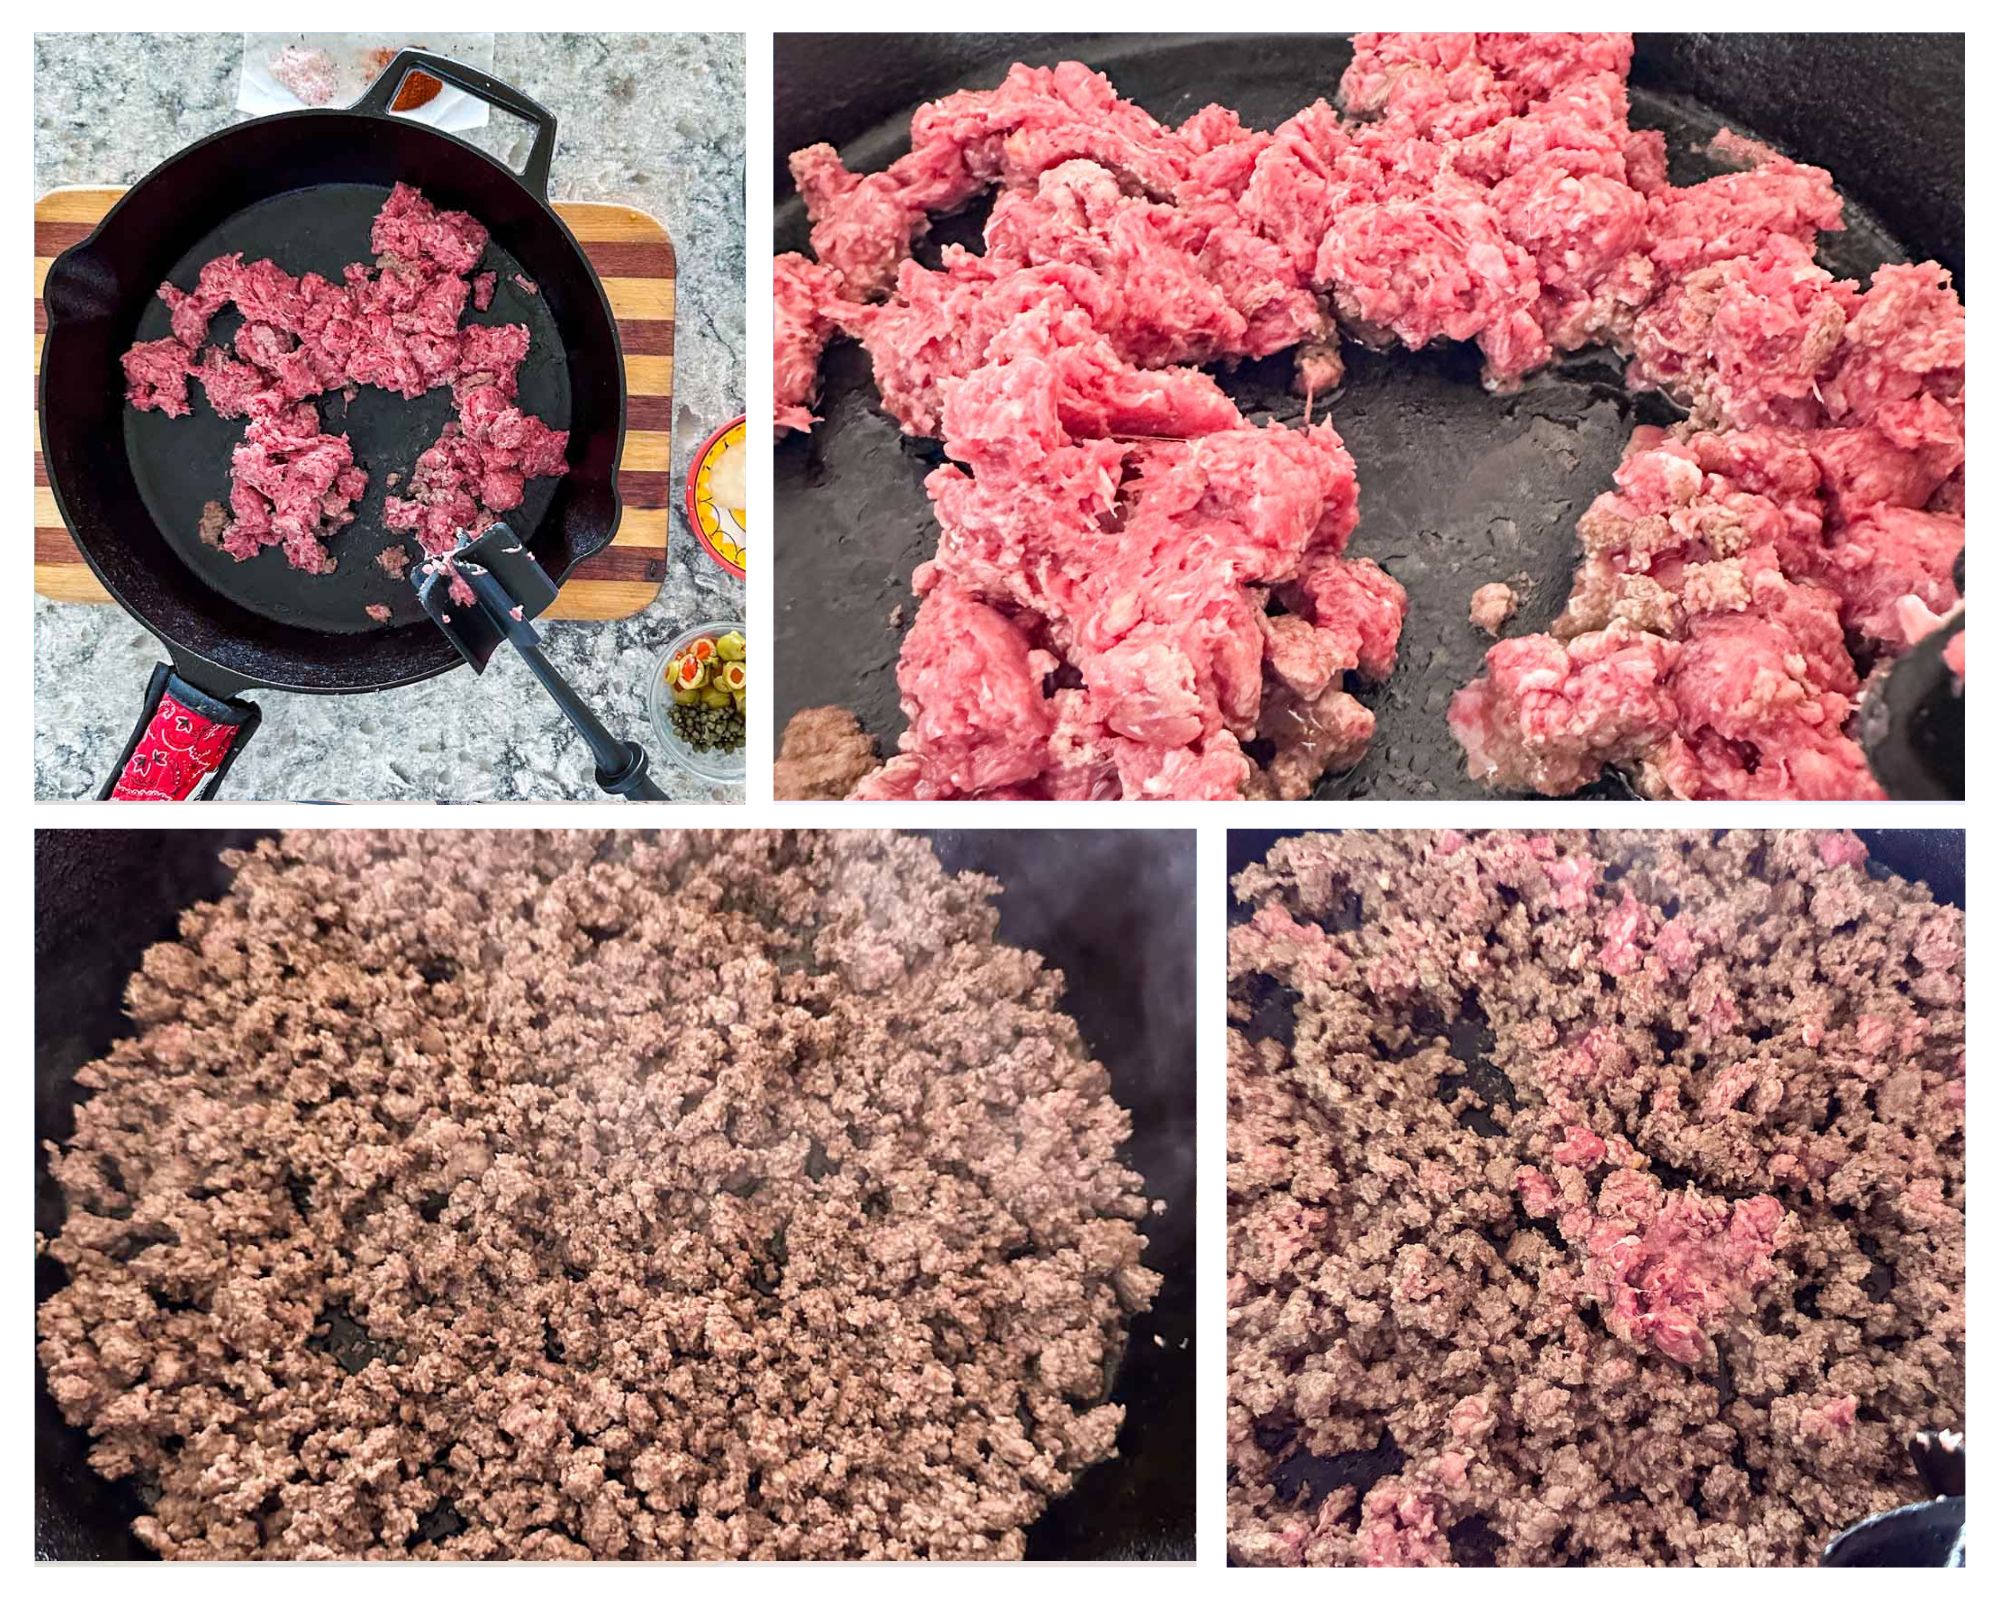 Collage, from top left clockwise: raw ground beef on hot skillet; Breaking ground beef into smaller clumps; Ground beef almost all brown; Ground beef completely browned.